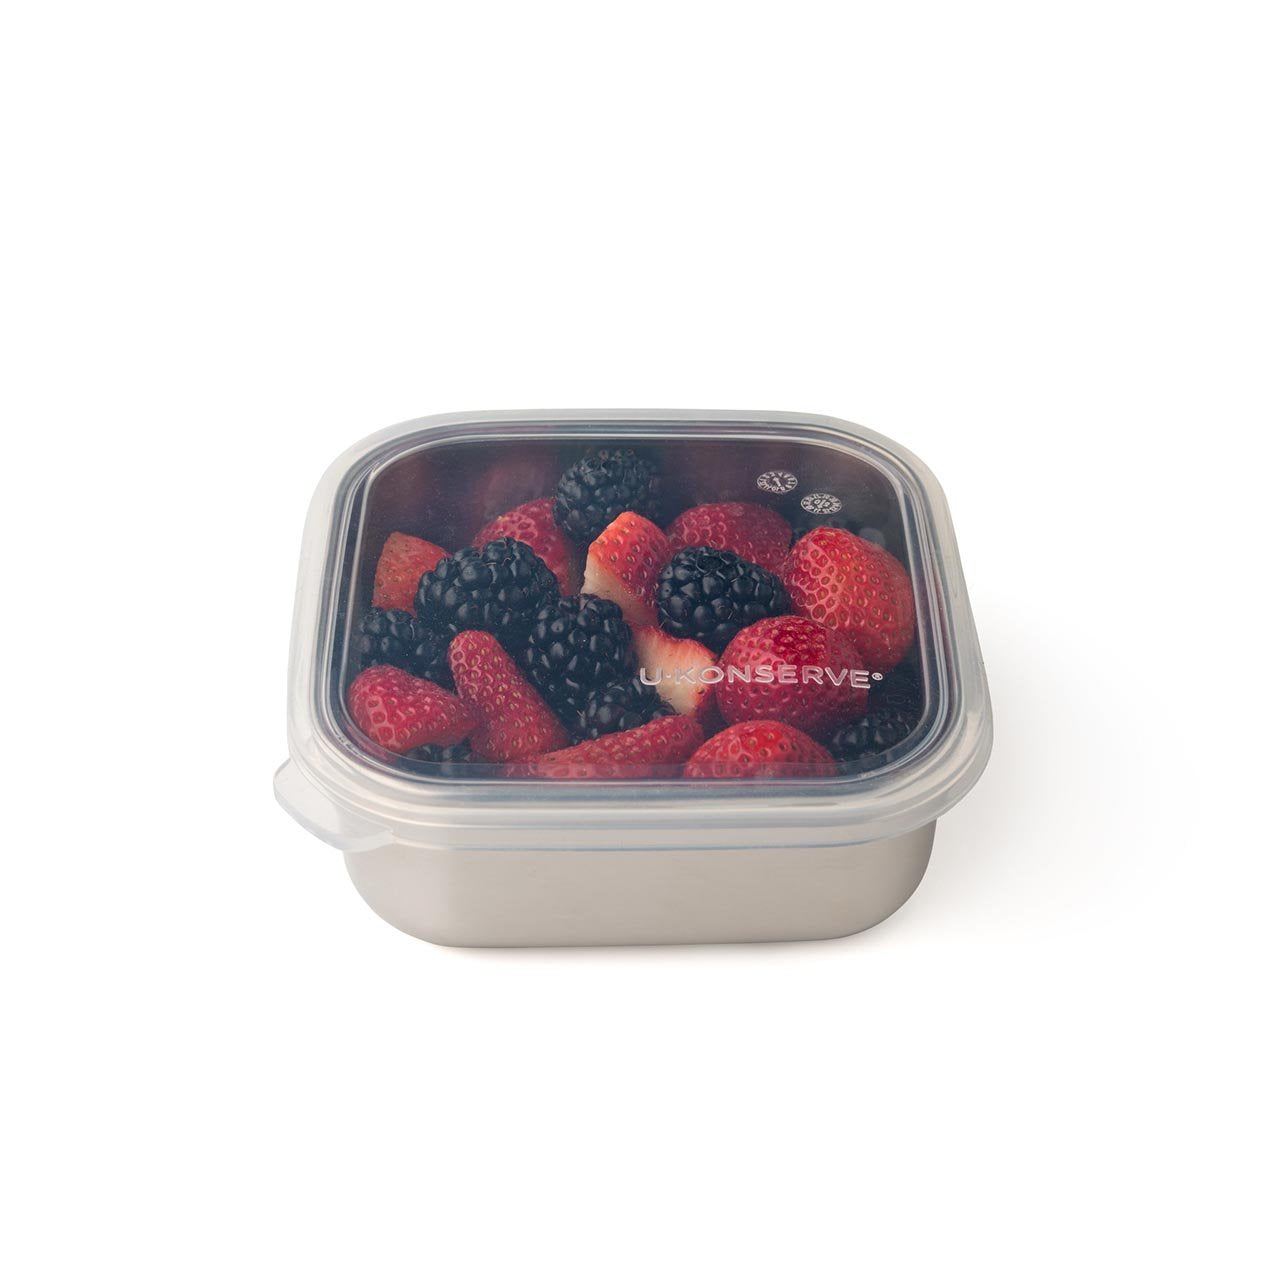 U Konserve Stainless Steel Mini 2.5 Ounce Food Container, Set of 3